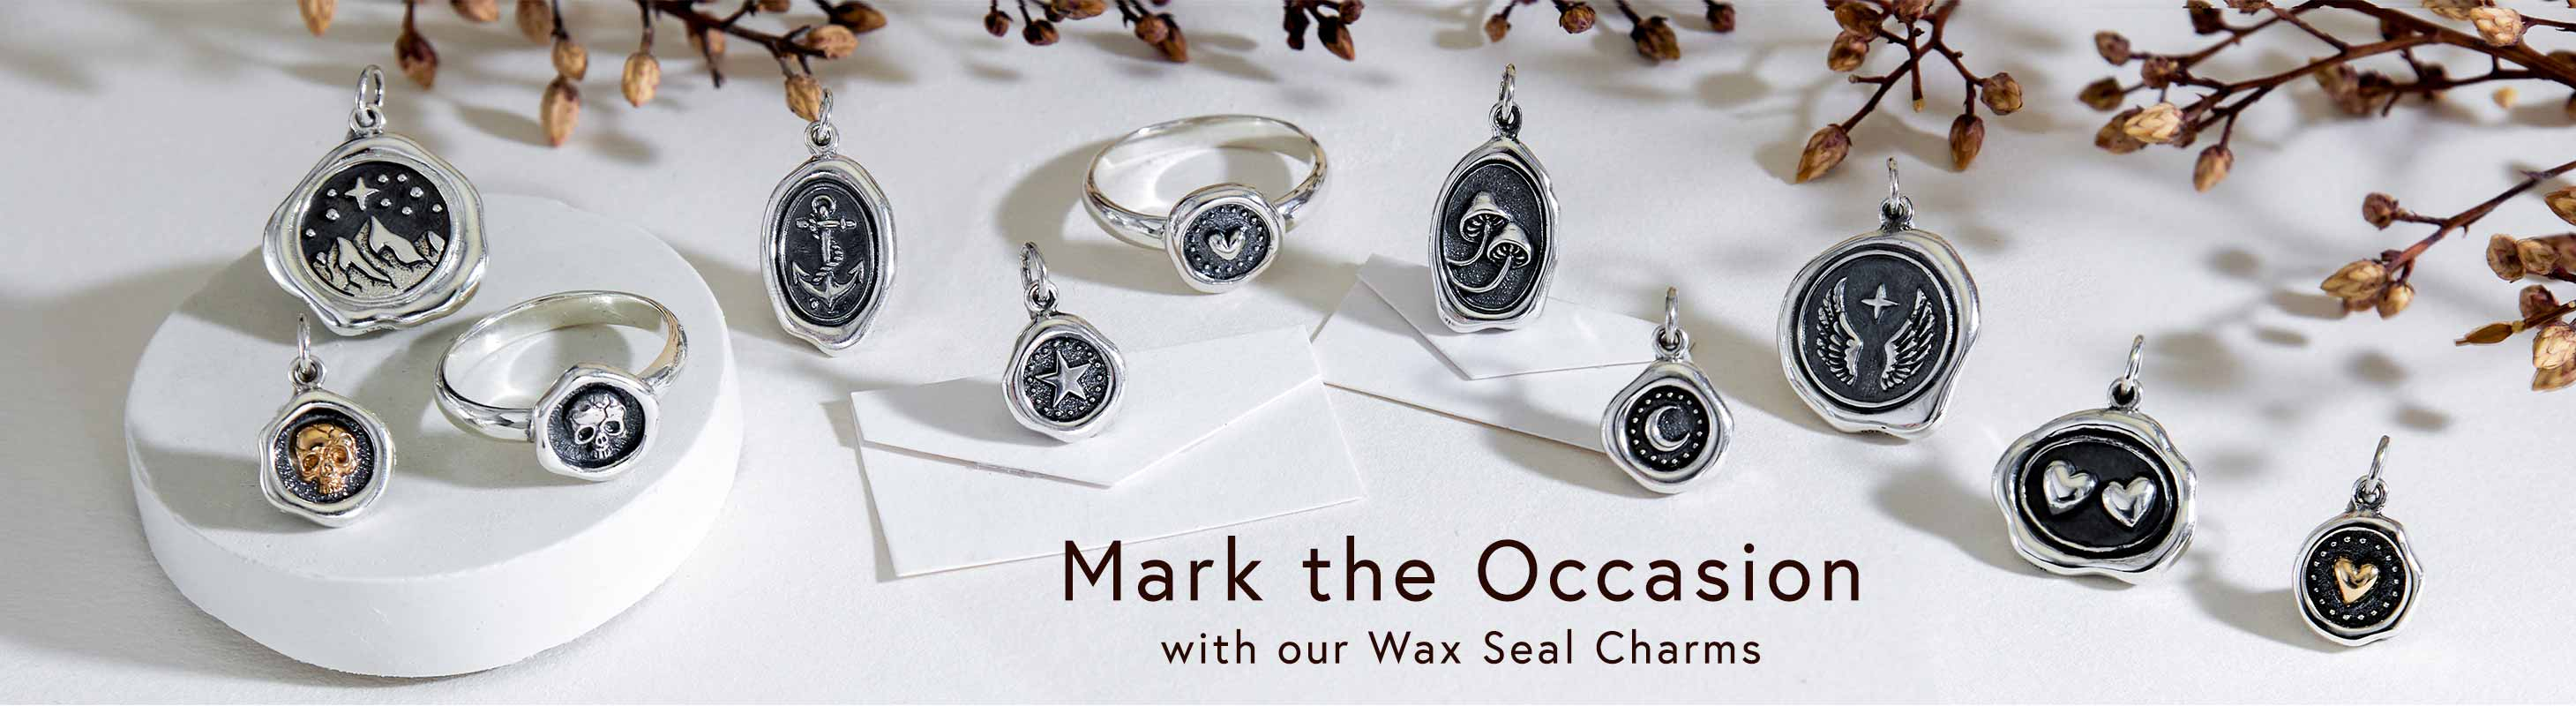 Mark the occasion with our Wax Seal Charms.